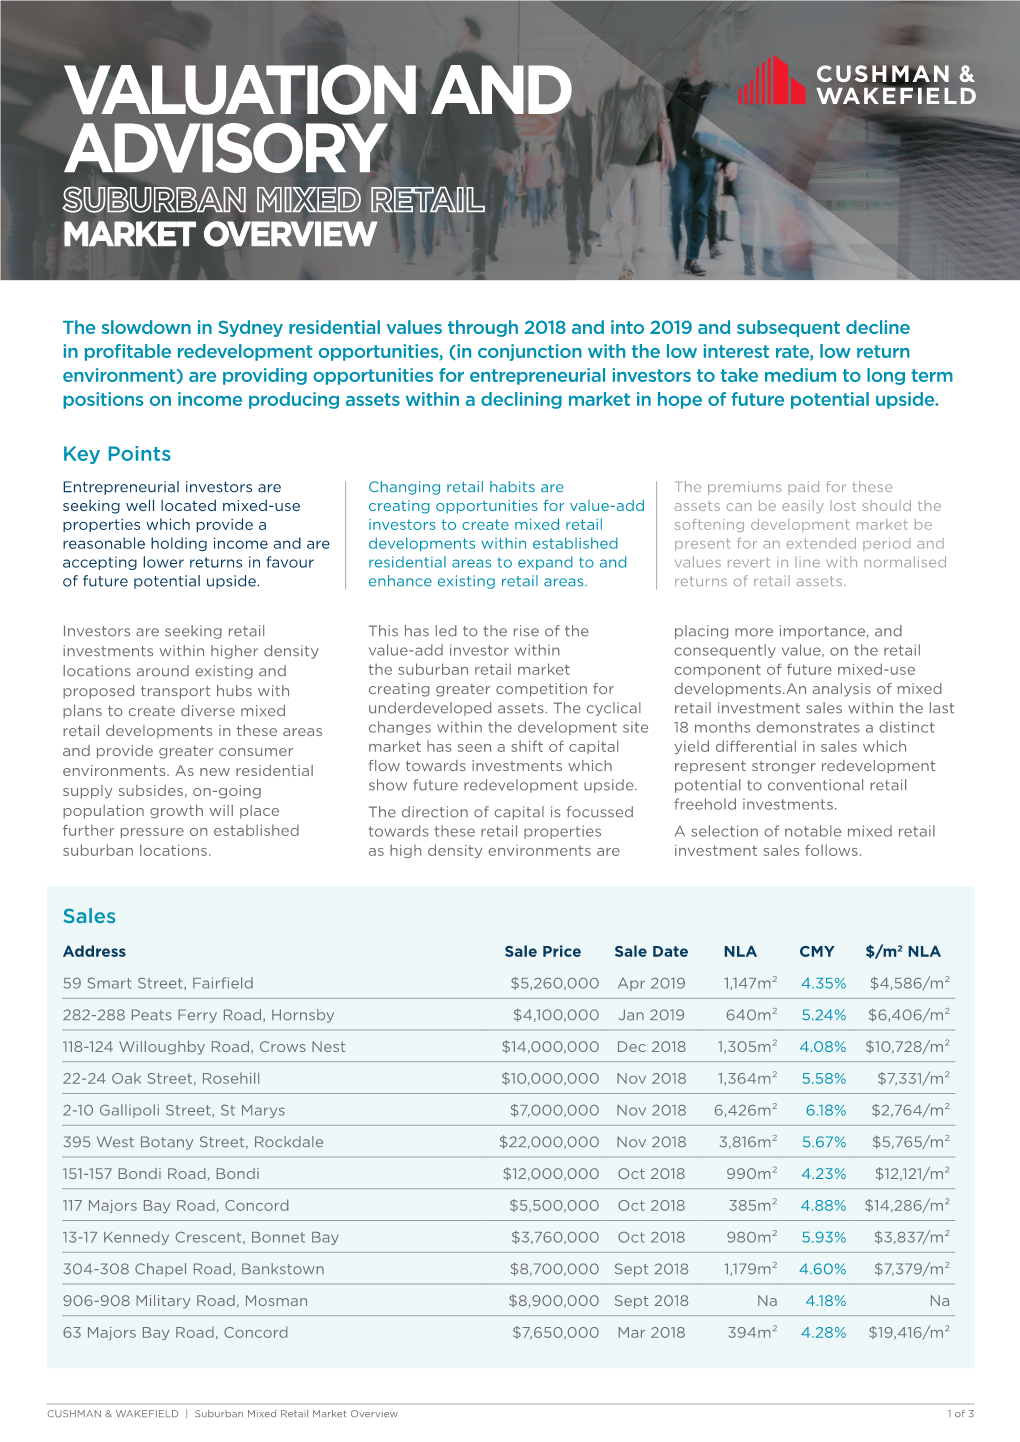 Valuation and Advisory Market Overview